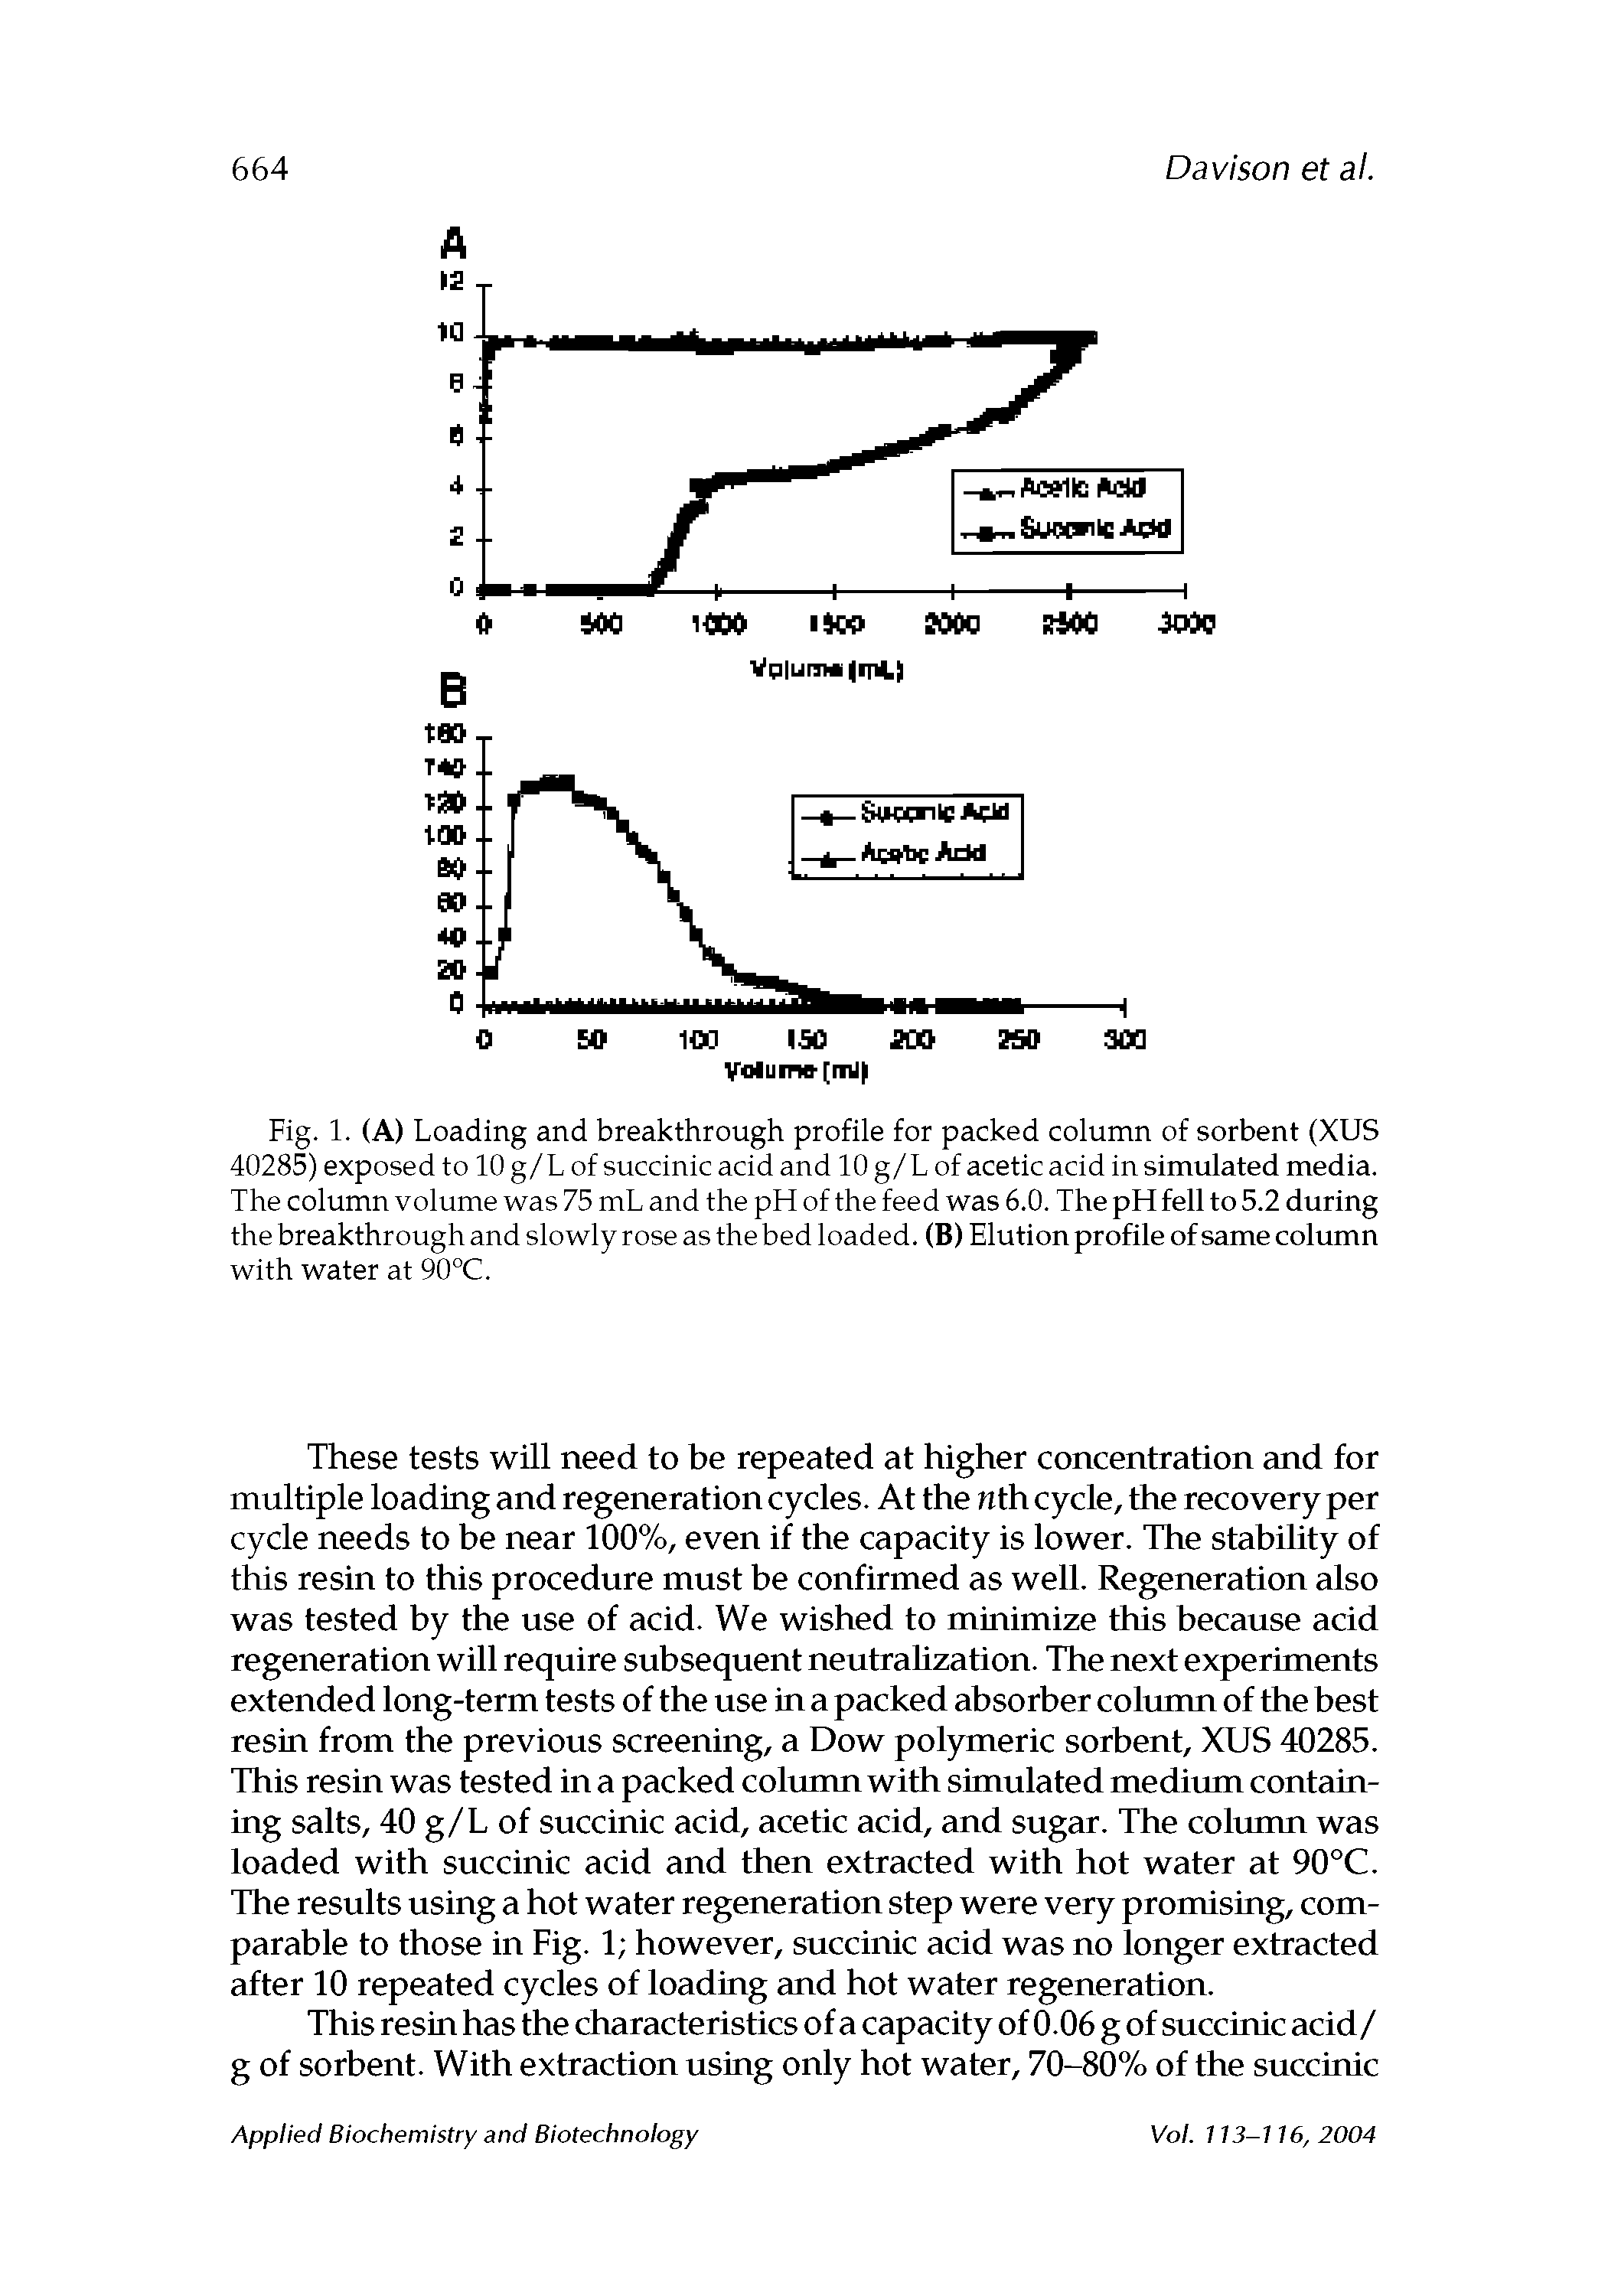 Fig. 1. (A) Loading and breakthrough profile for packed column of sorbent (XUS 40285) exposed to 10 g/L of succinic acid and 10 g/L of acetic acid in simulated media. The column volume was 75 mL and the pH of the feed was 6.0. The pH fell to 5.2 during the breakthrough and slowly rose as the bed loaded. (B) Elution profile of same column with water at 90°C.